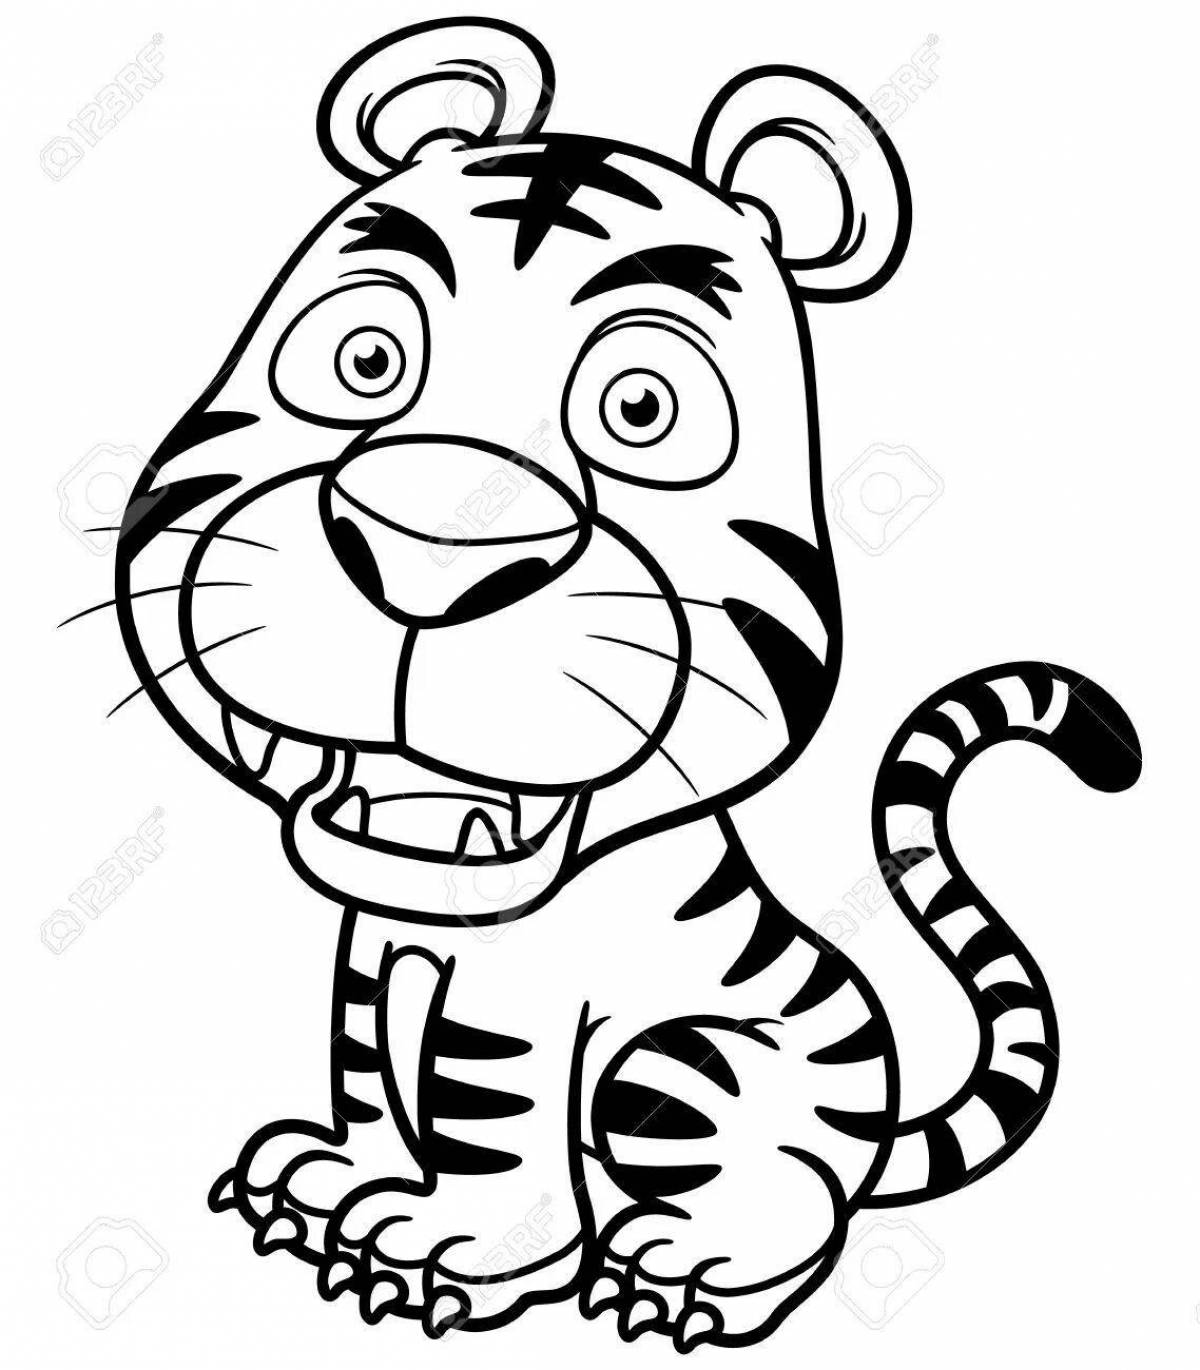 Beautiful tiger and lion coloring page